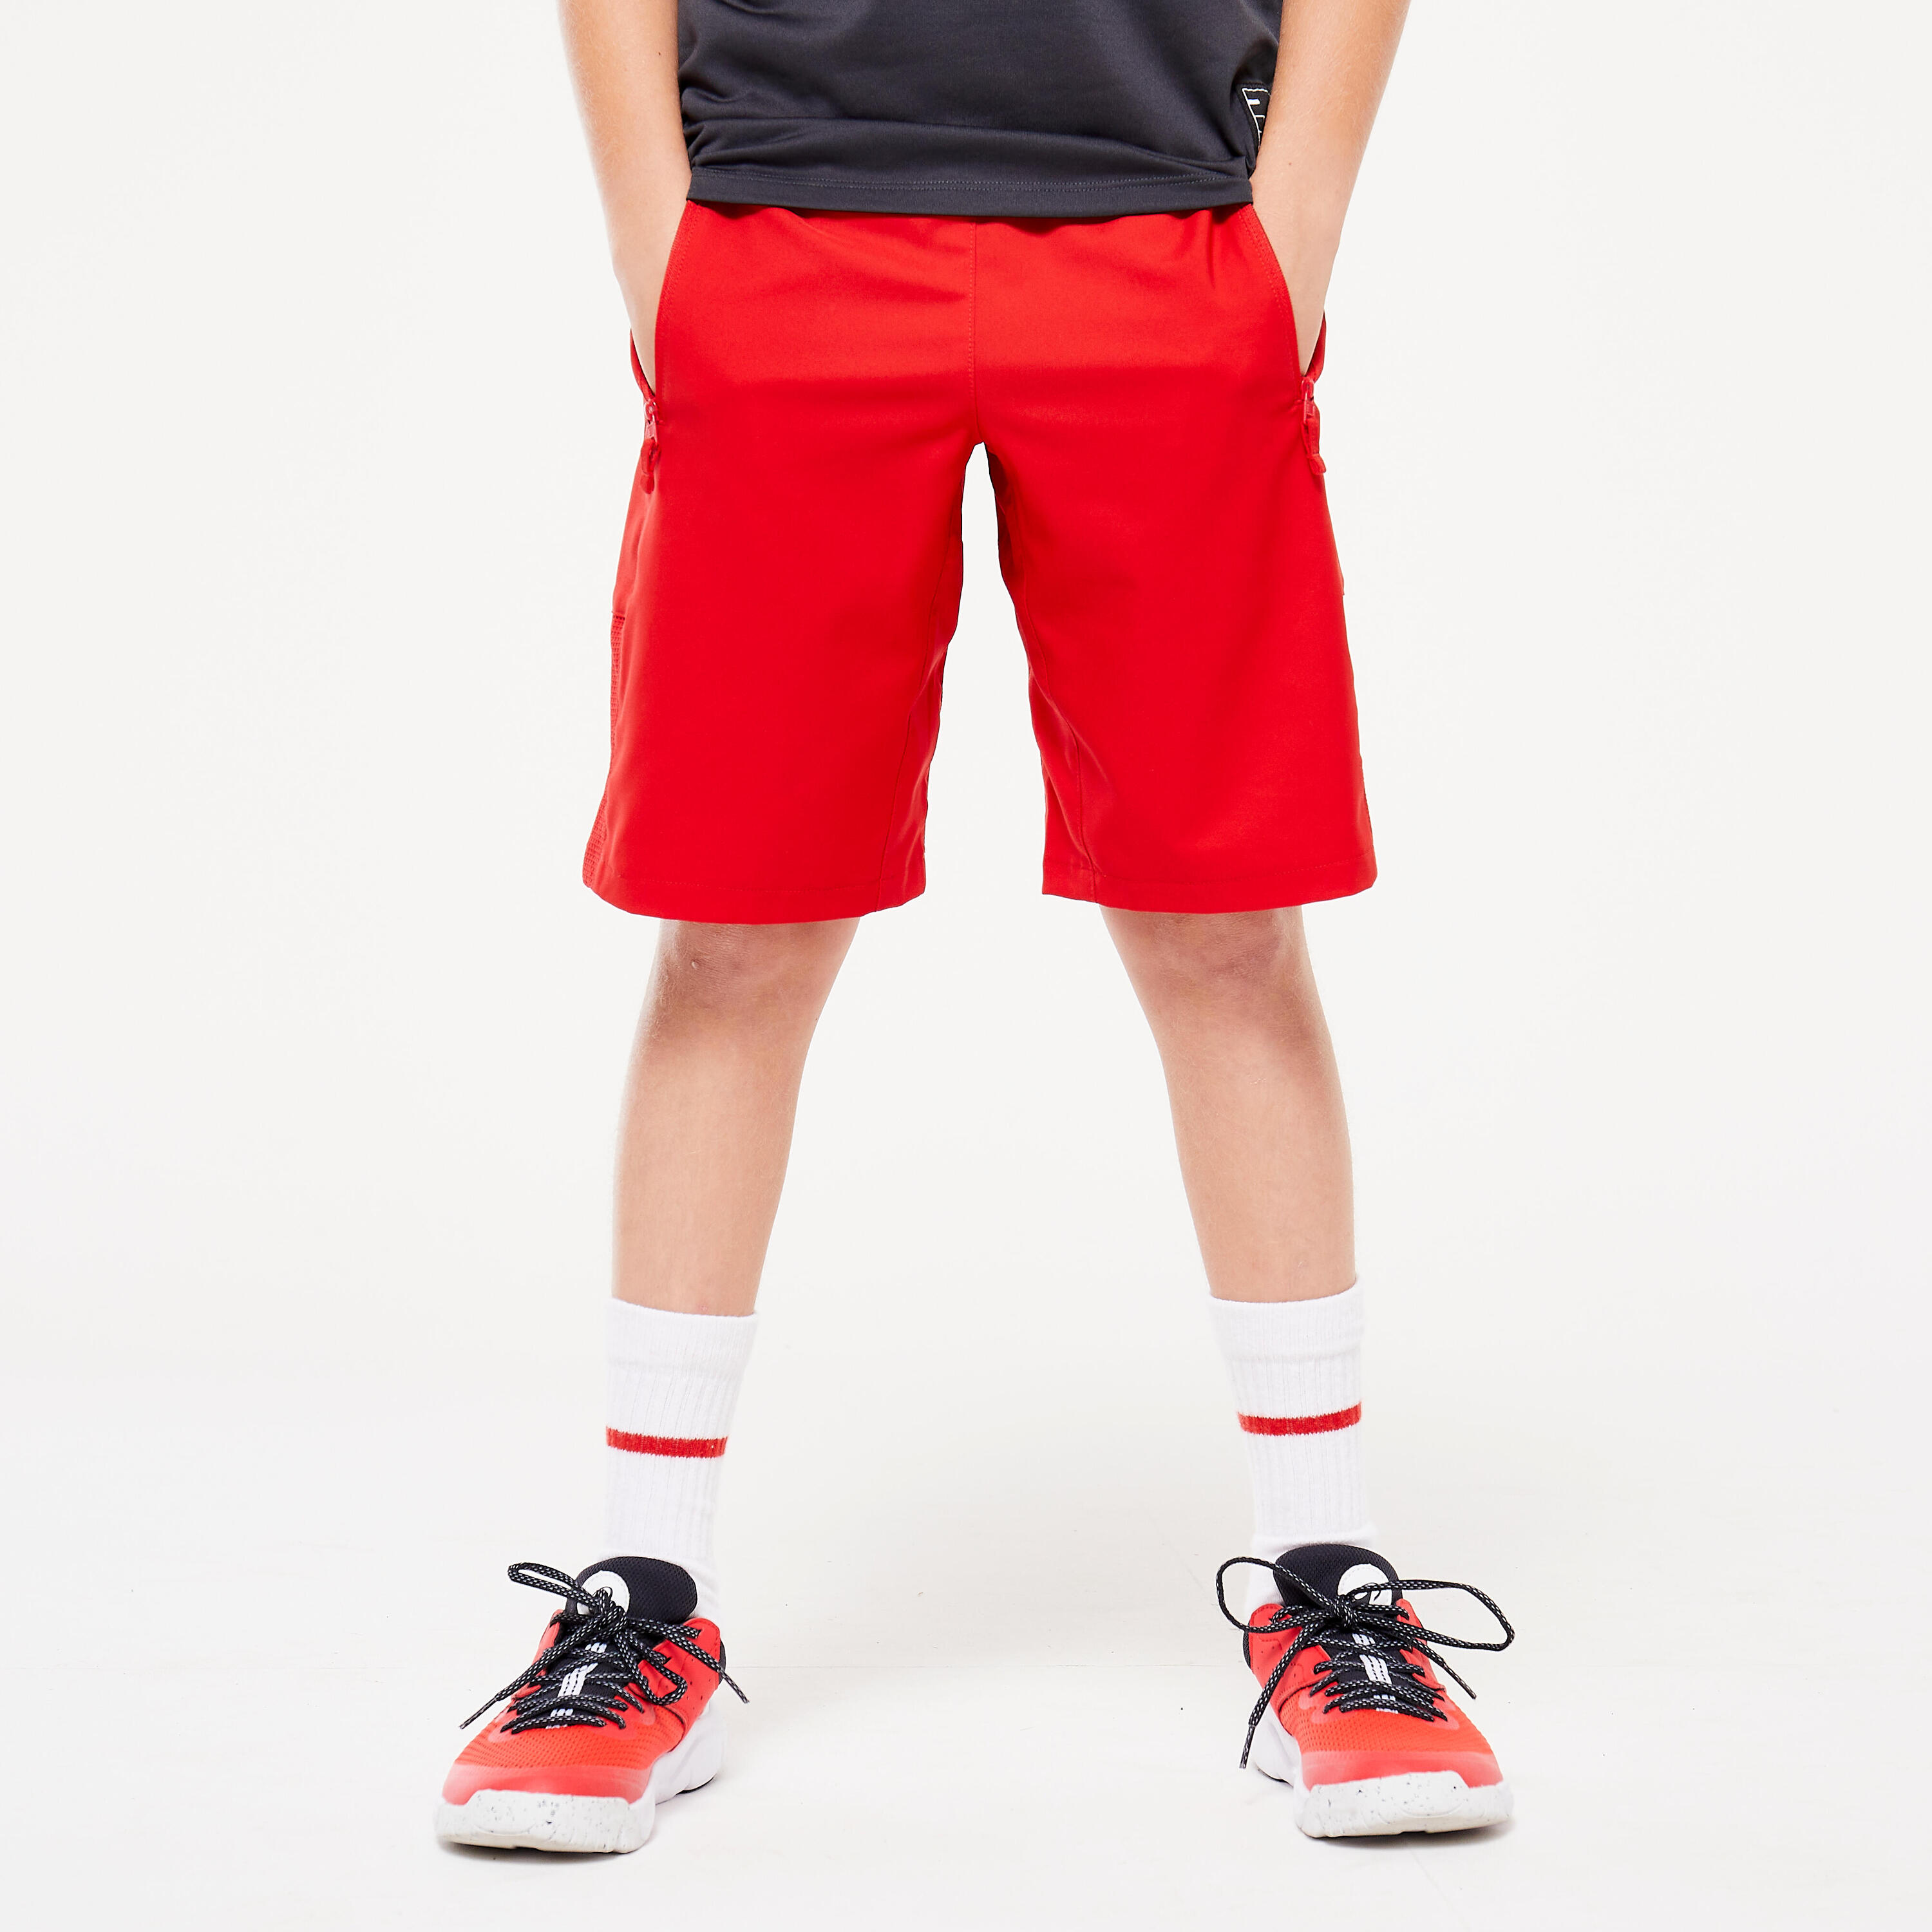 DECATHLON Kids' Breathable Shorts - Red